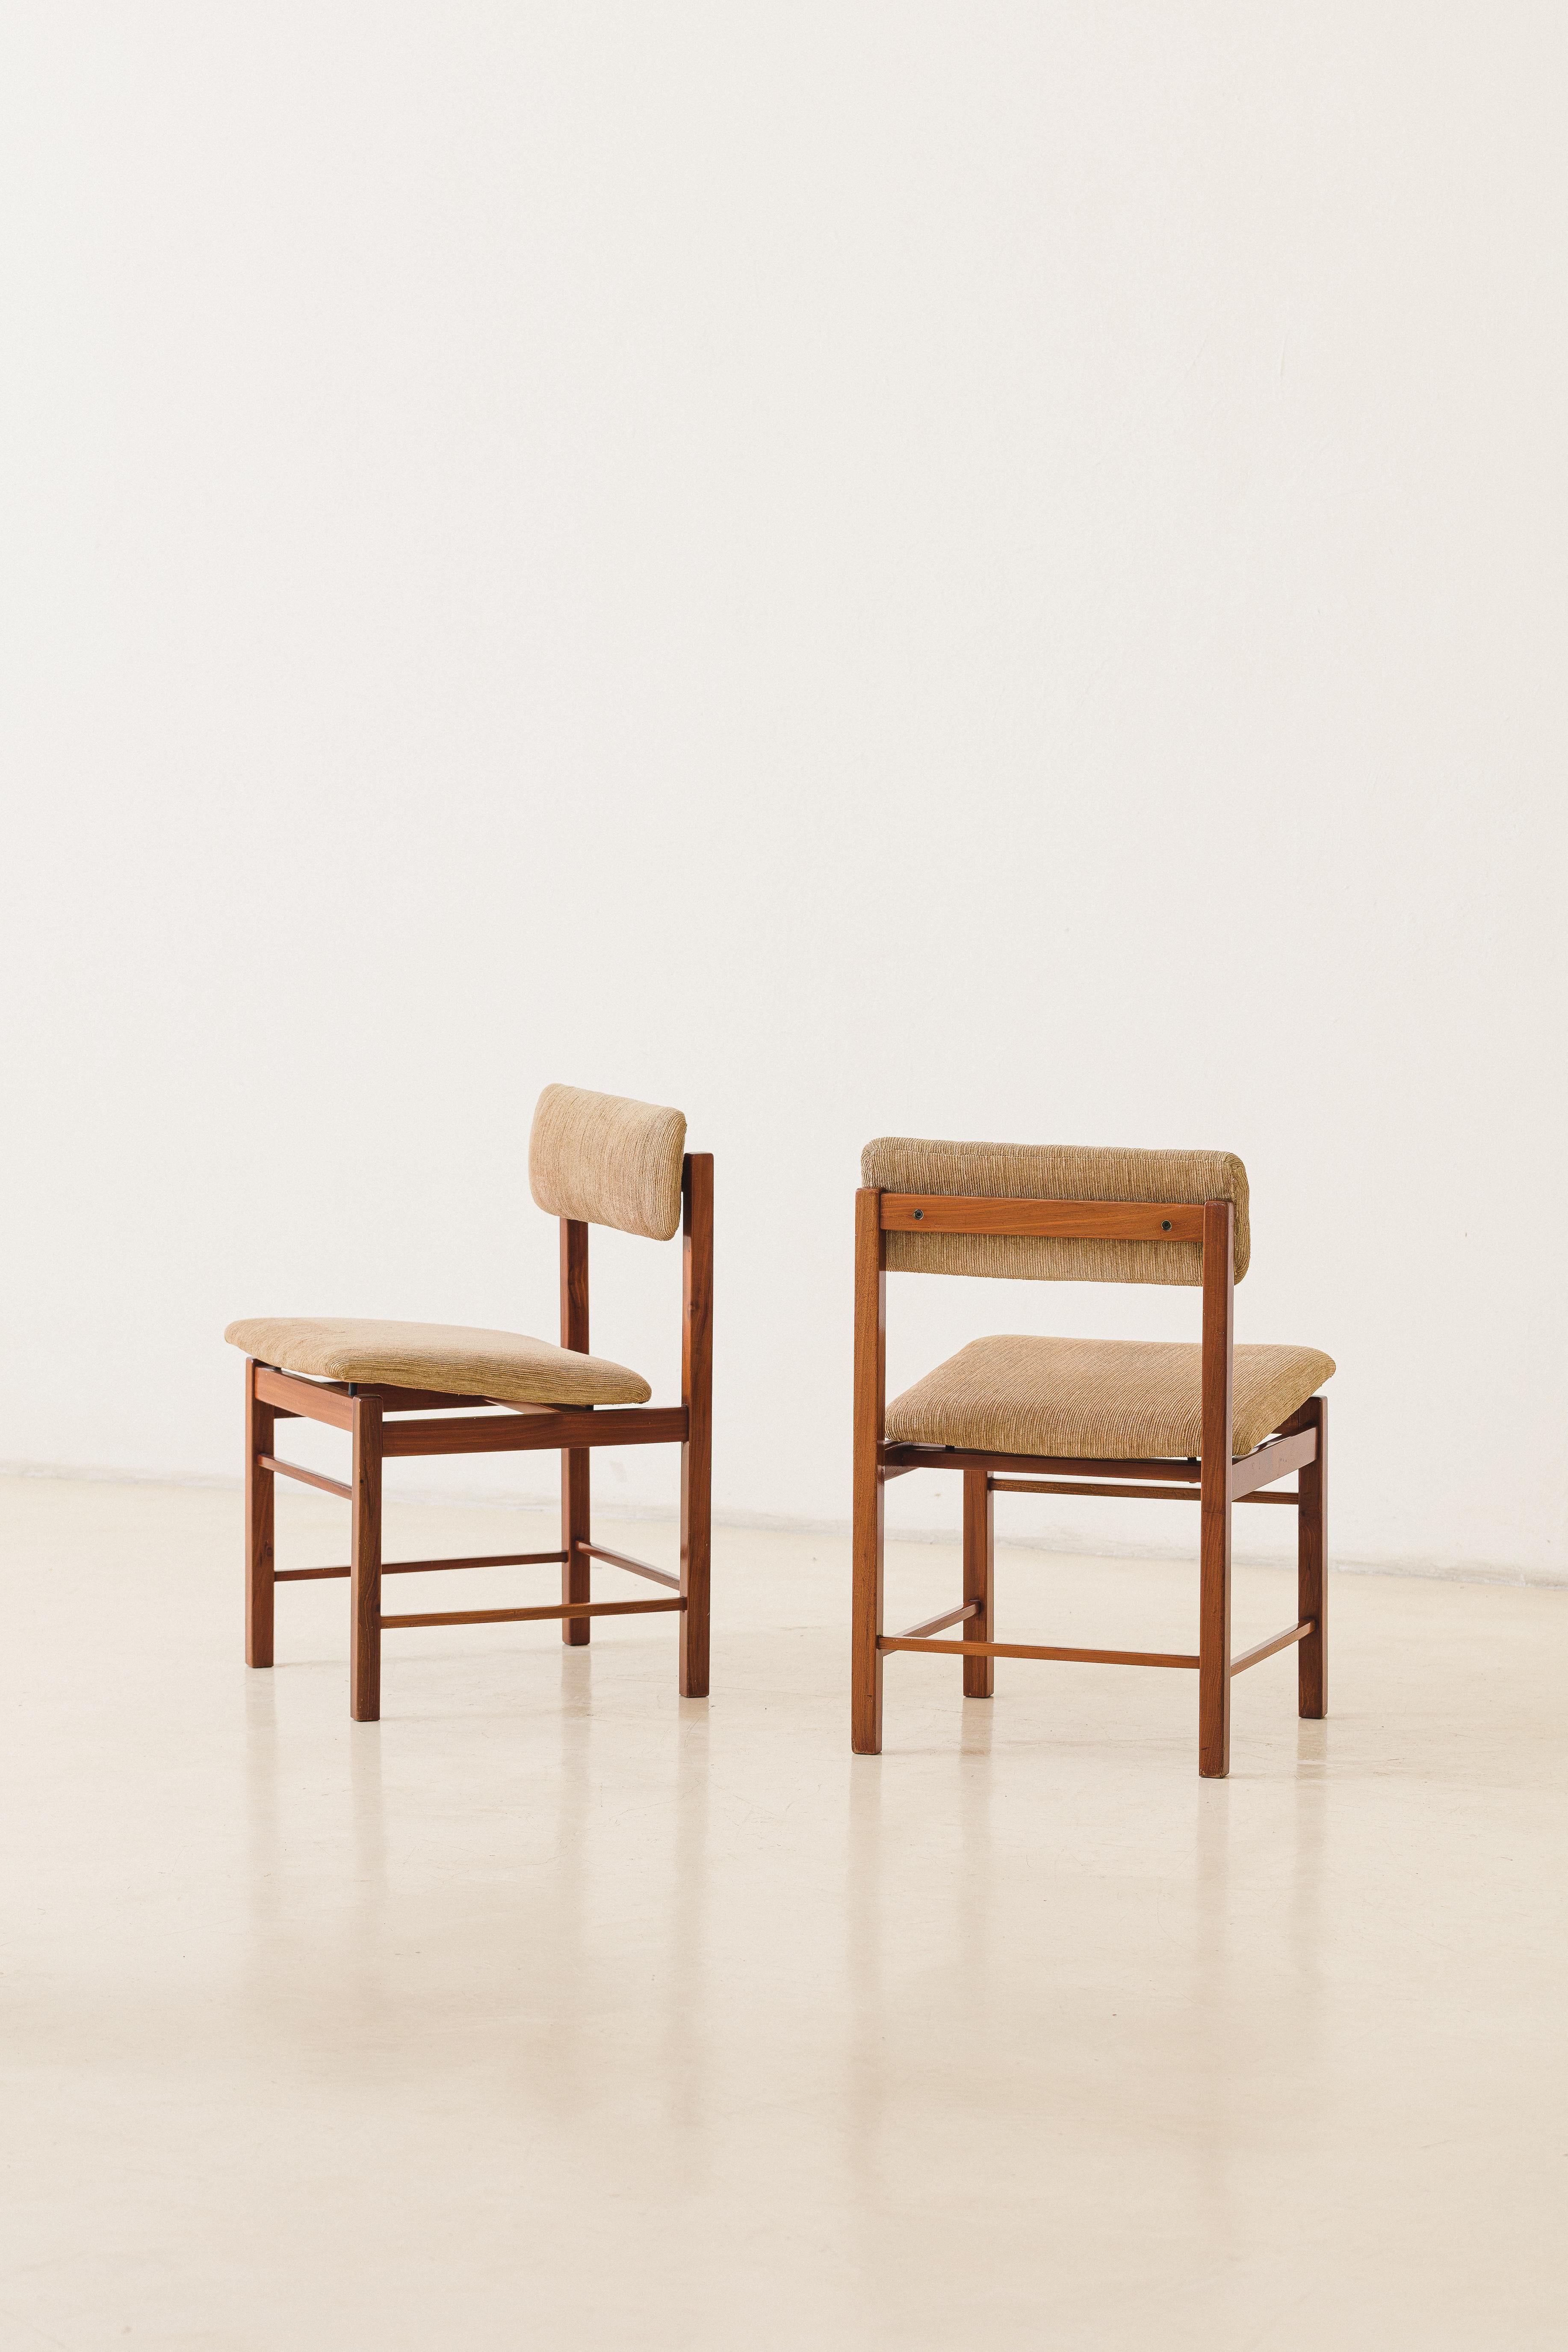 Set of Six Dining Chairs by Ernesto Hauner, Freijó Wood, Mobilinea, 1960s In Good Condition For Sale In New York, NY